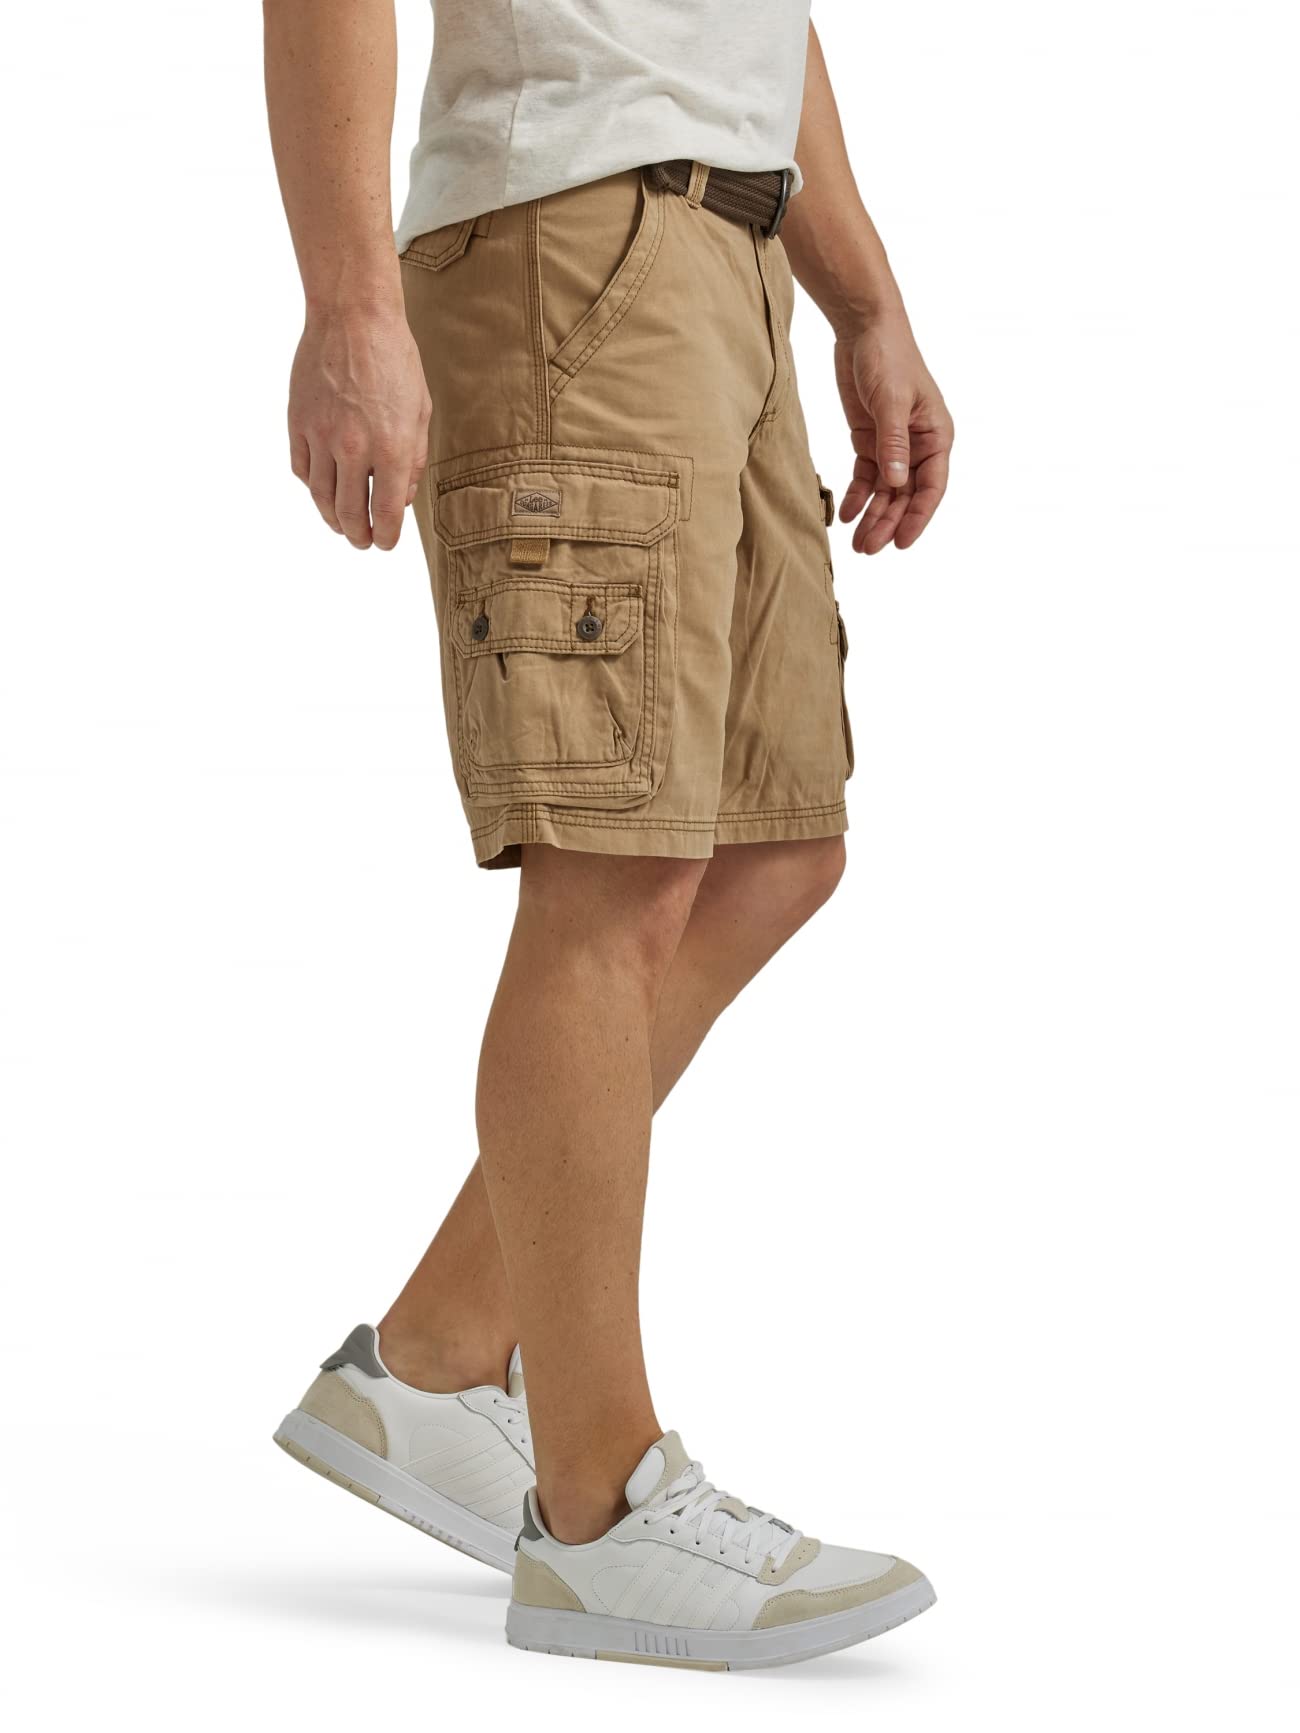 Lee Men's Big & Tall Dungarees Belted Wyoming Cargo Short